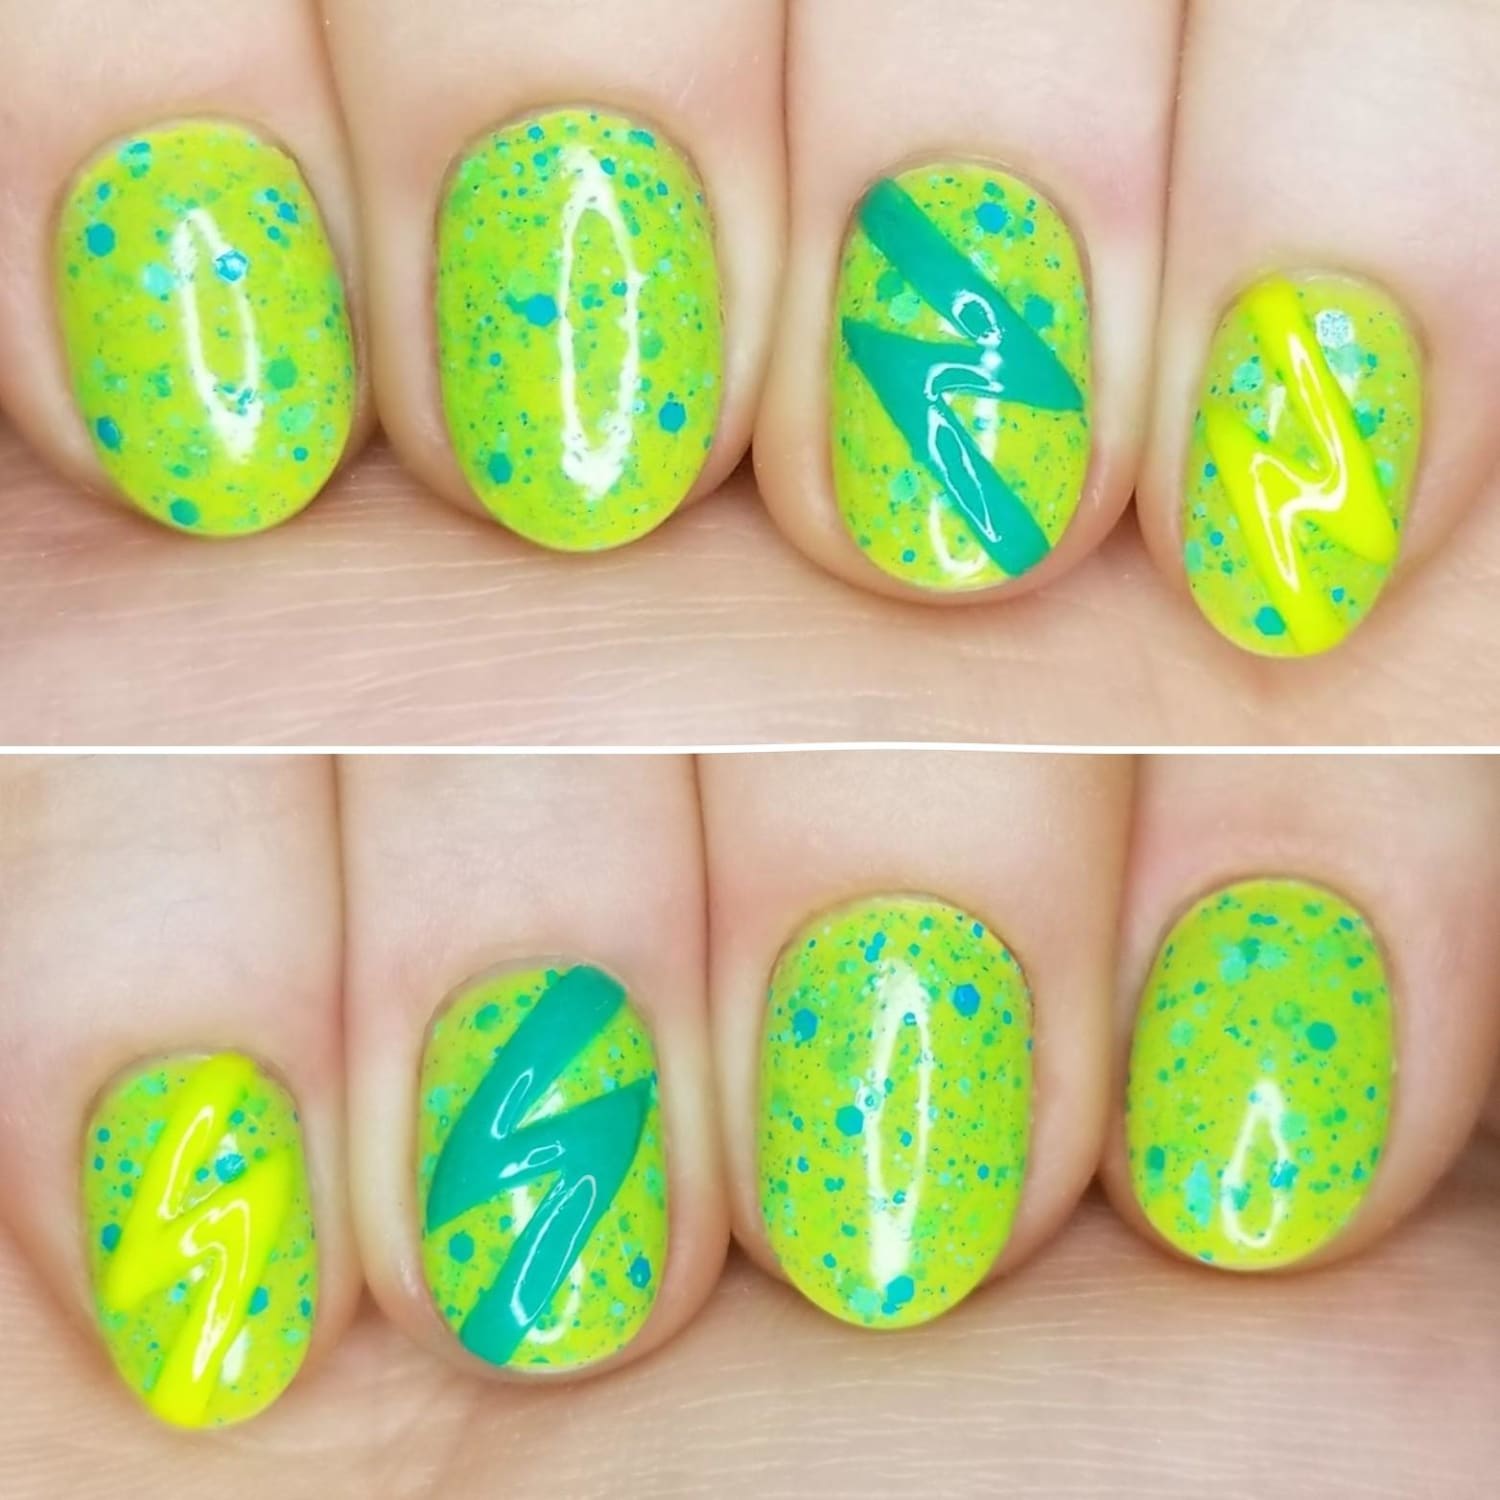 Glam Polish "Don't Be Such a Guppy" with Moon Shine Mani "Cowabunga!" and Color Club "Yellin' Yellow"